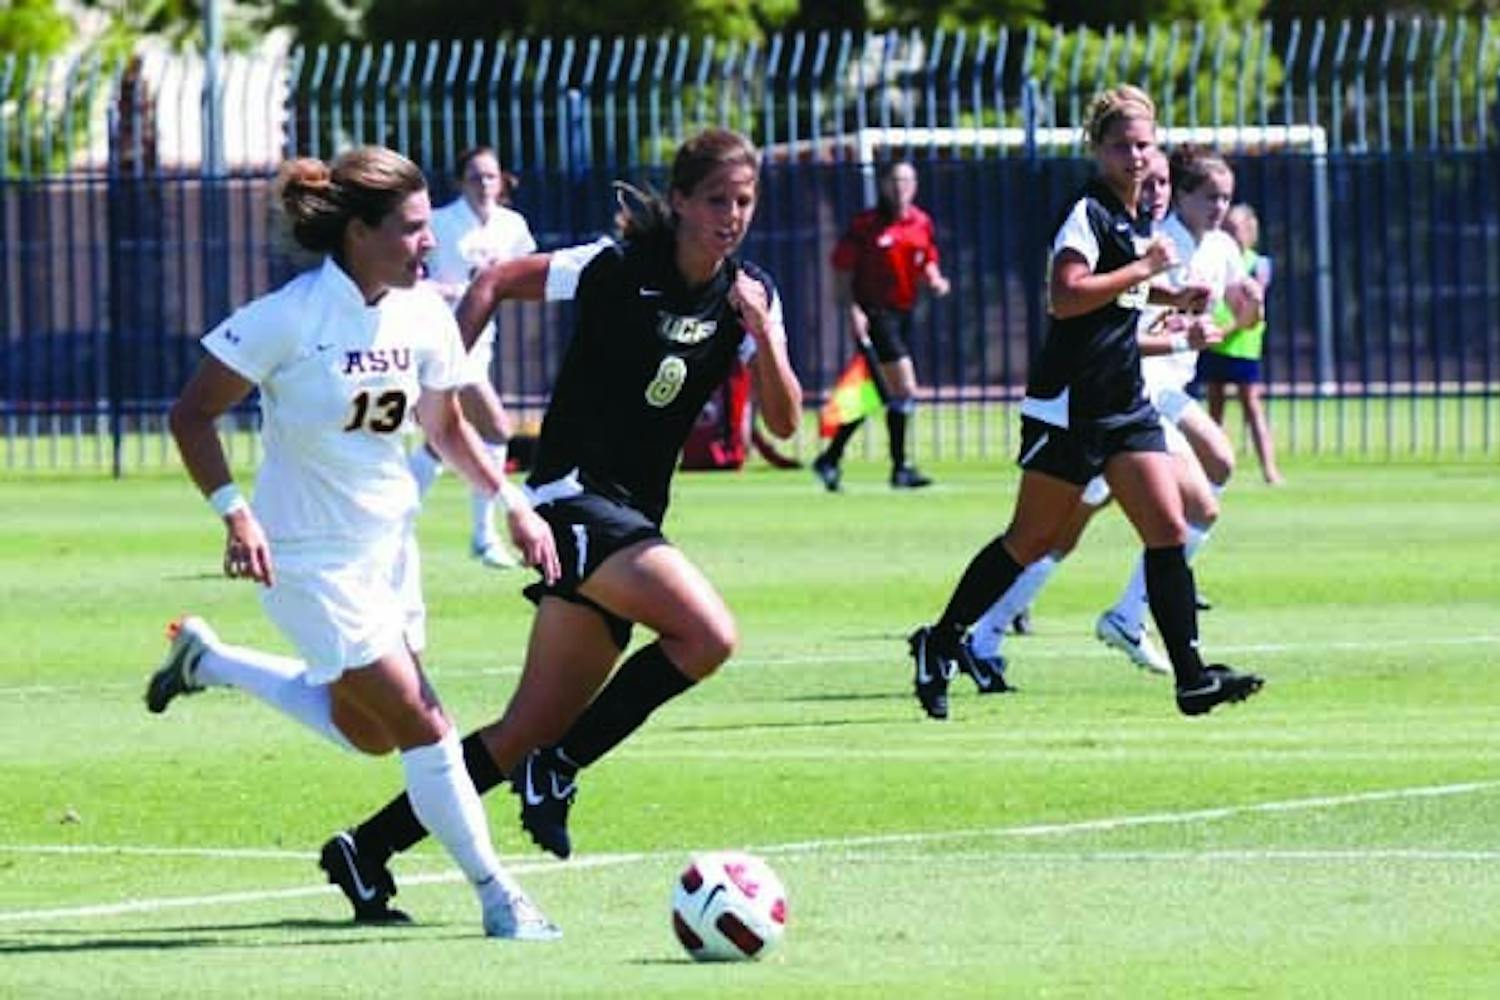 Soccer ROUGH DAY: Senior midfielder Alexandra Elston looks for an open teammate with Central Florida senior Lauren Halbert in pursuit. The Knights topped the Sun Devils 5-0 Sunday afternoon. (Photo by Beth Easterbrook)